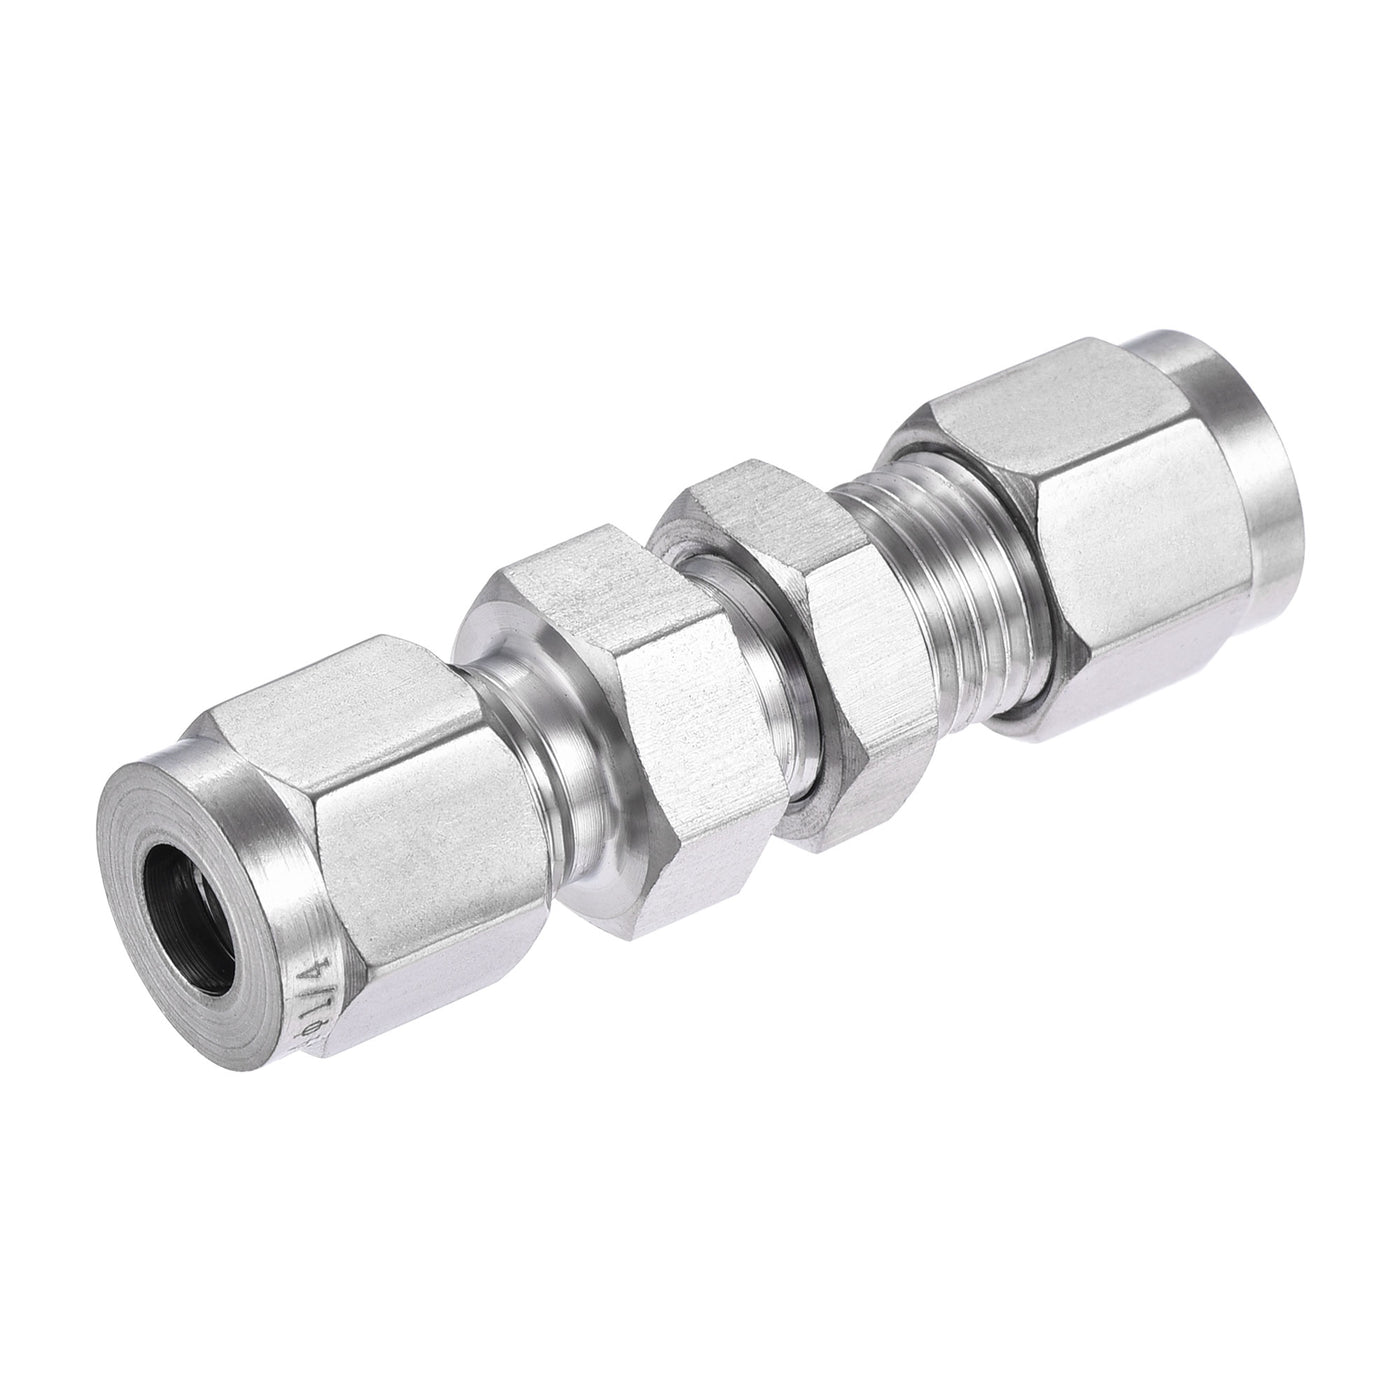 Uxcell Uxcell Compression Tube Fitting 3/8" Tube OD x 3/8" Tube OD Bulkhead Union Coupling Adapter 304 Stainless Steel